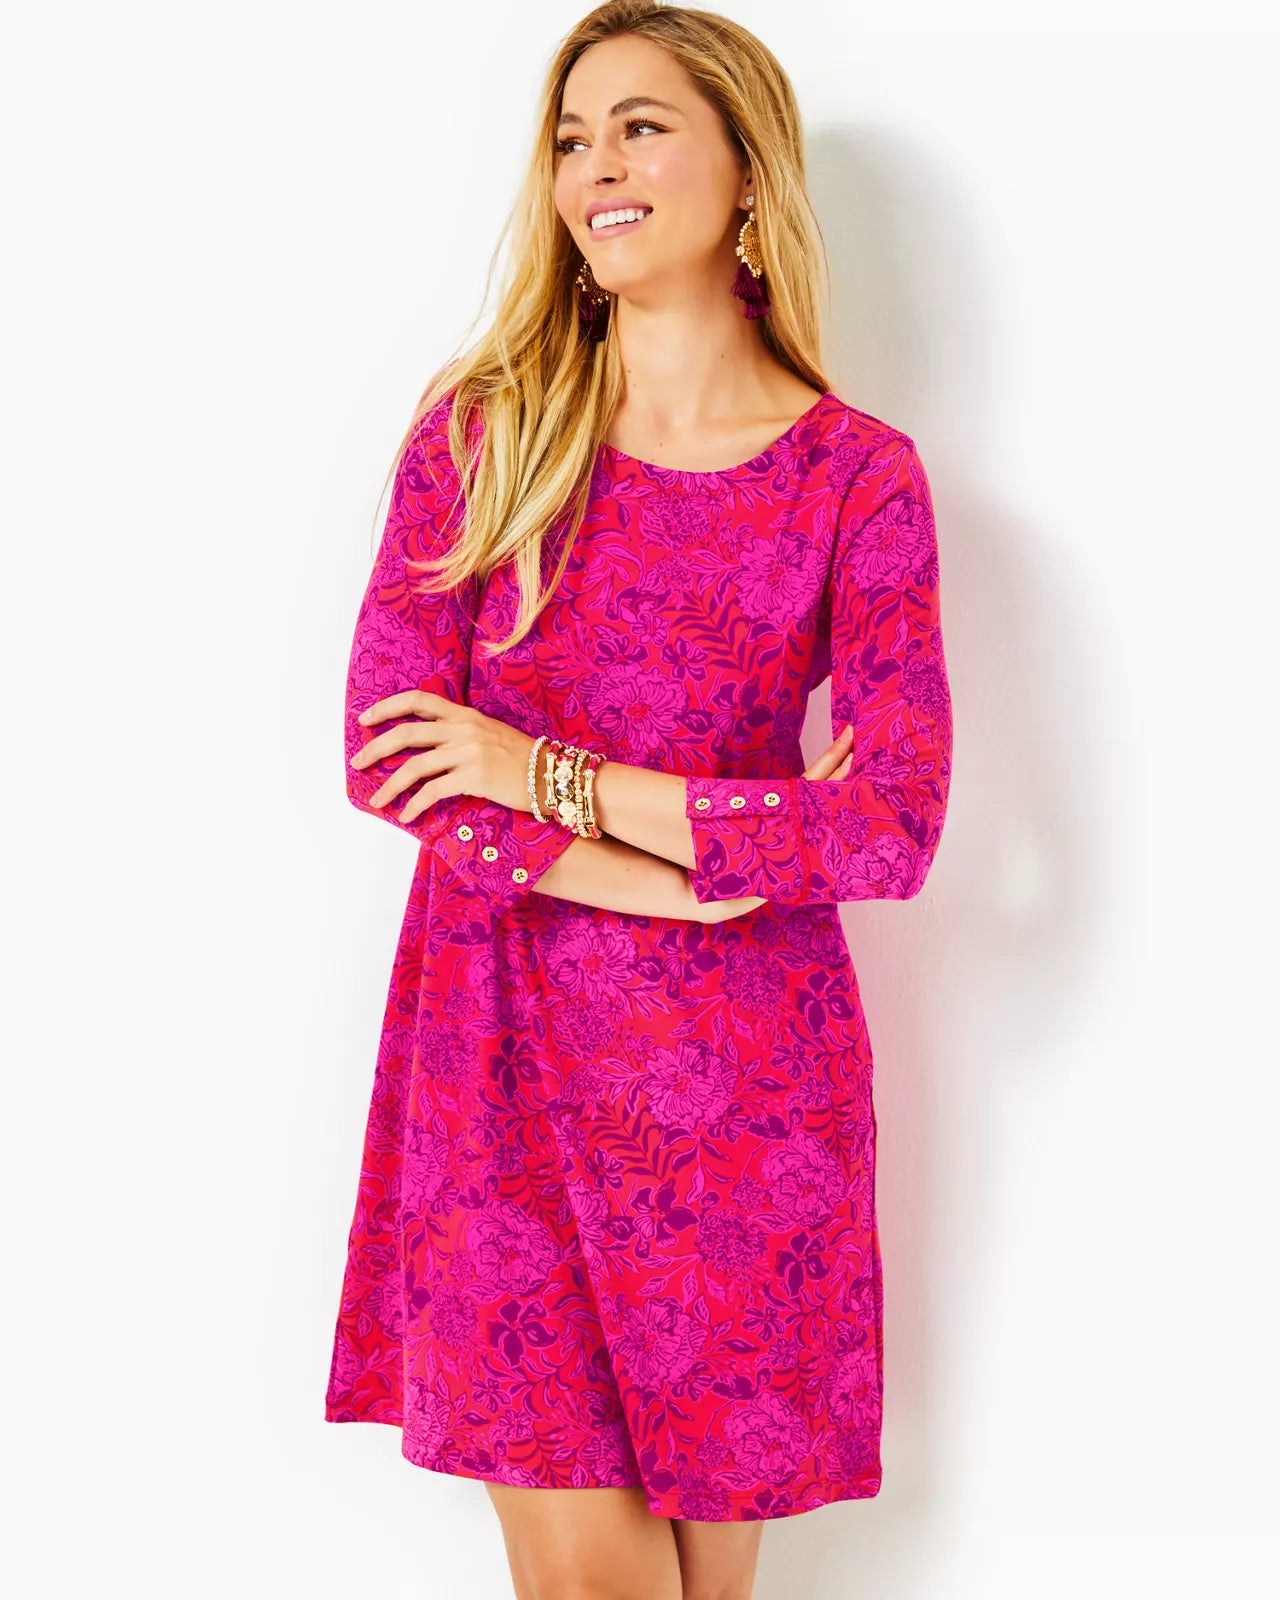 UPF 50 Solia Chilly Lilly Dress